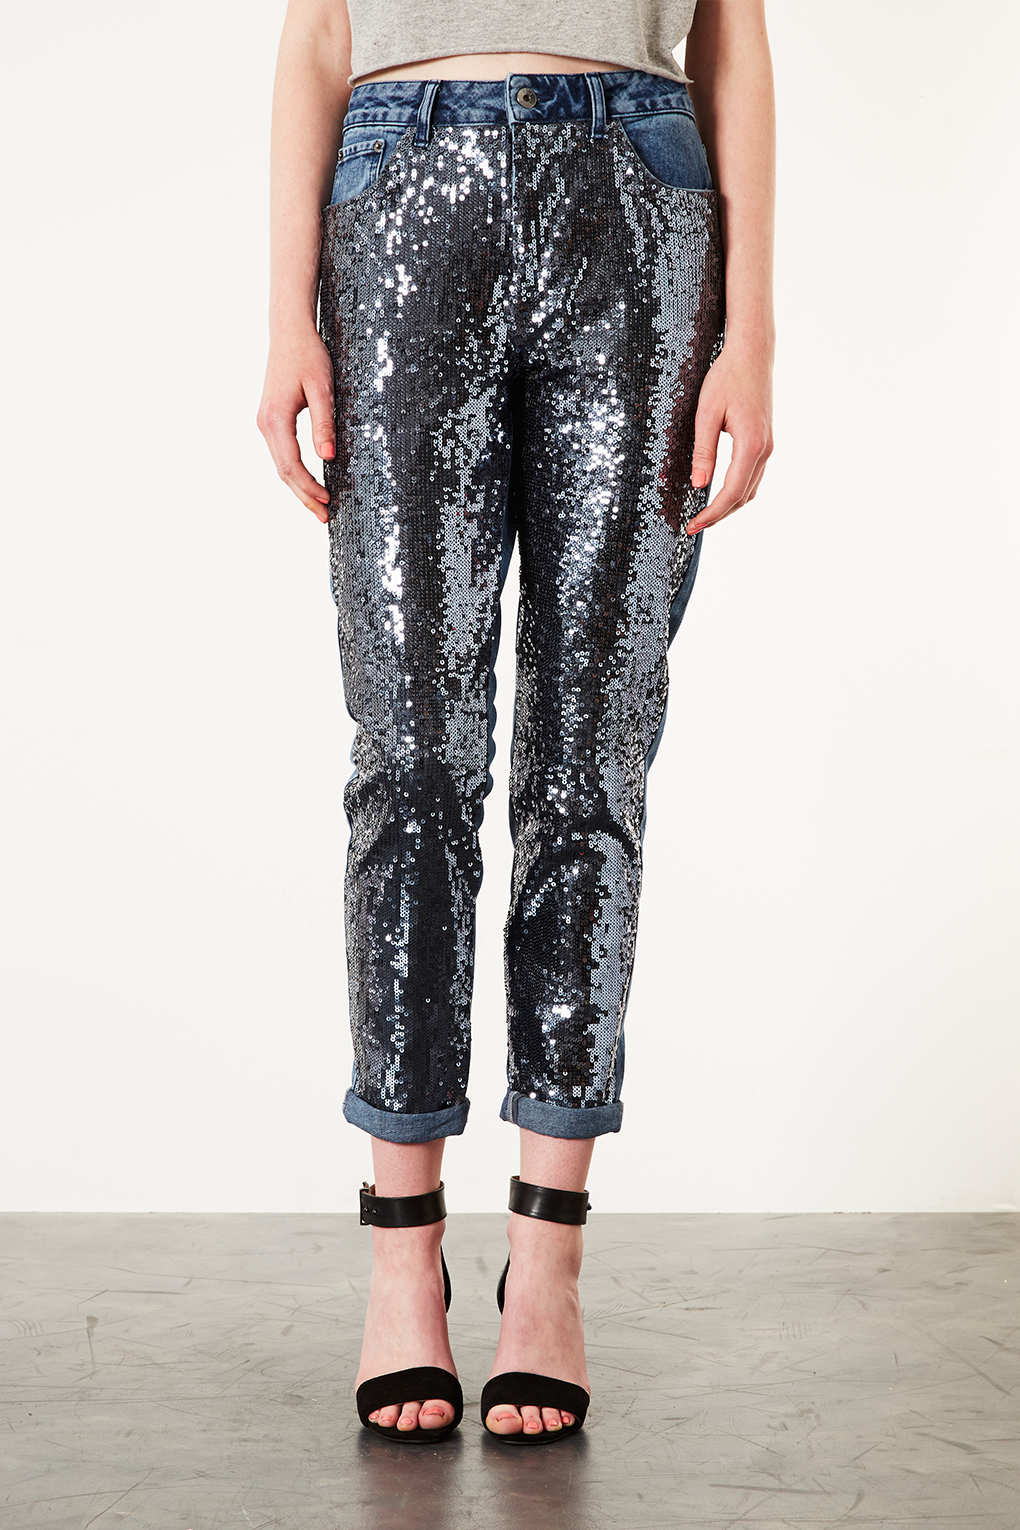 Lyst - Topshop Moto Sequin Mom Jeans in Blue